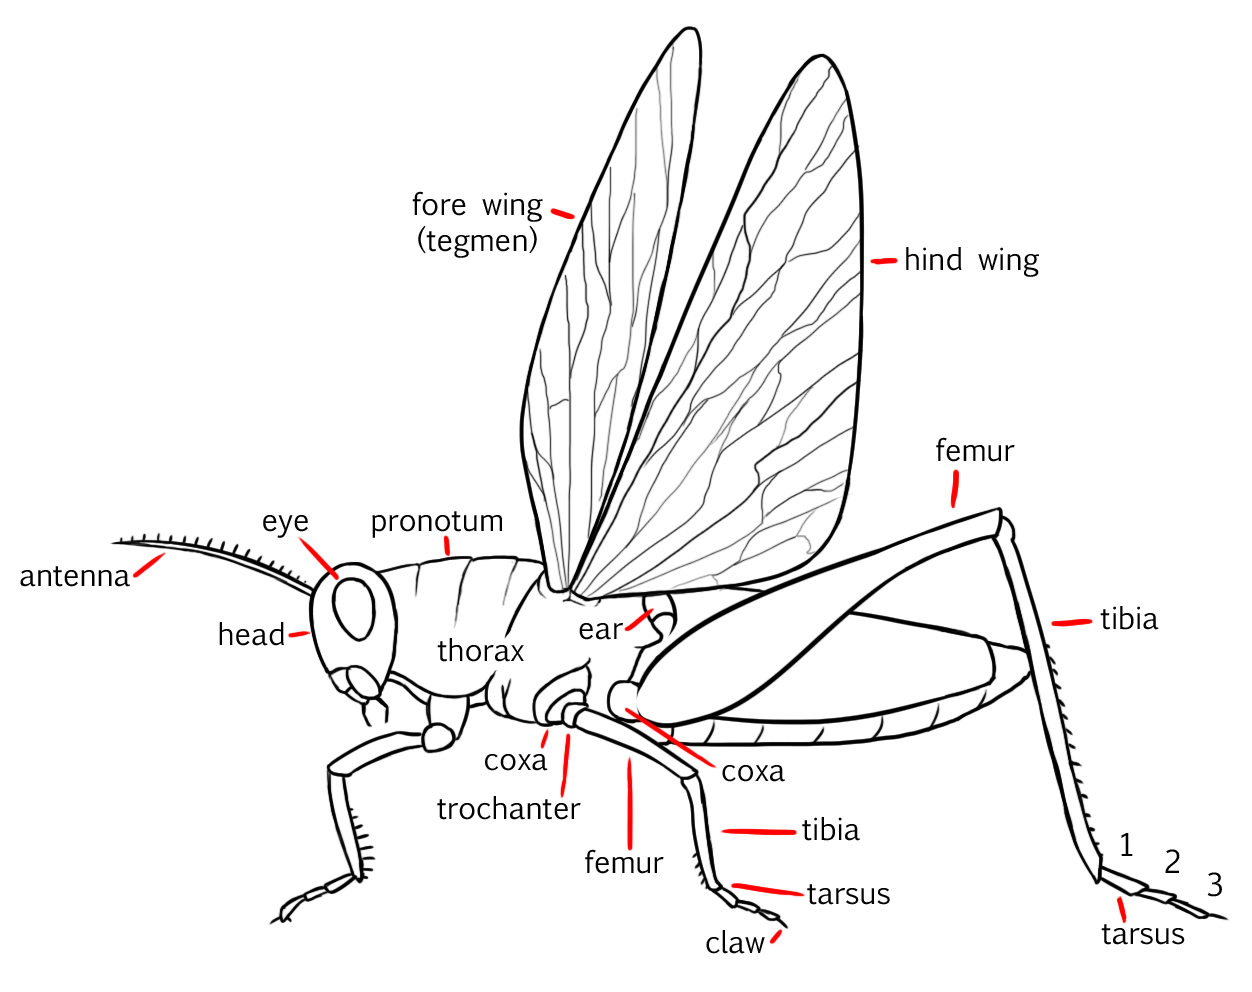 Insect Anatomy